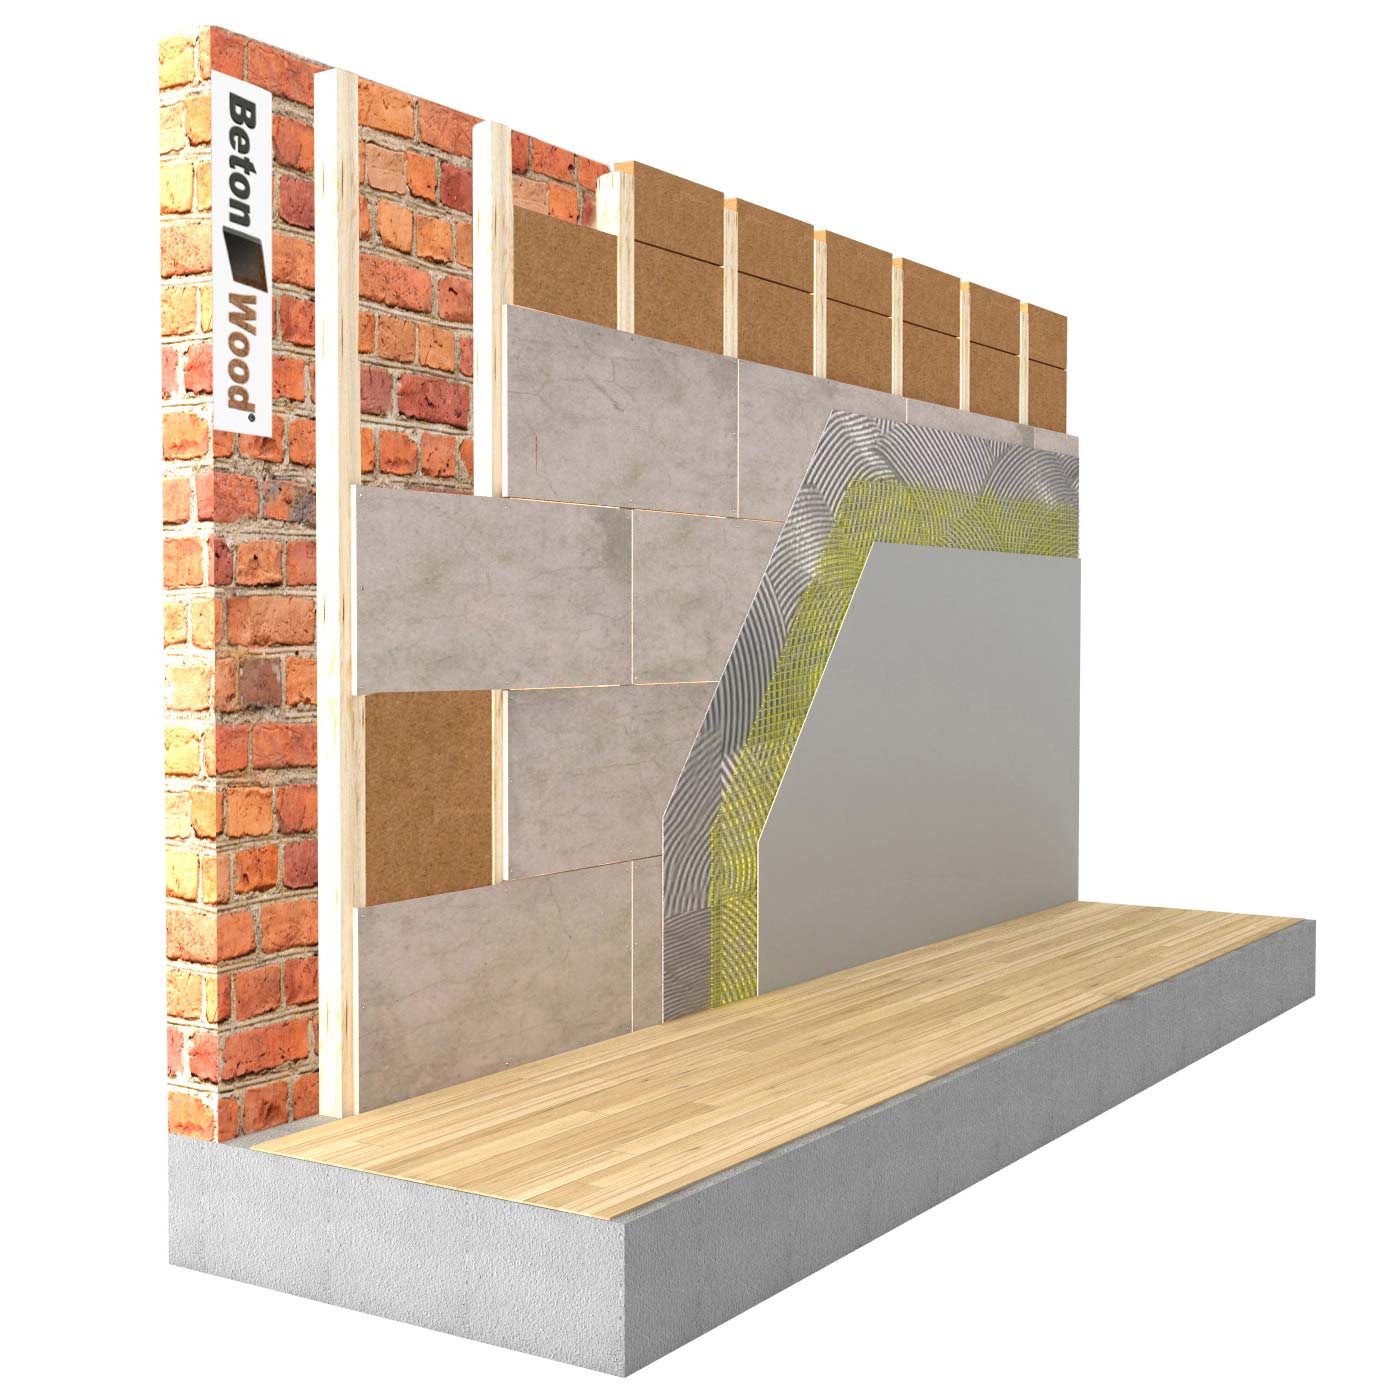 Internal insulation system with Therm SD wood fiber on masonry